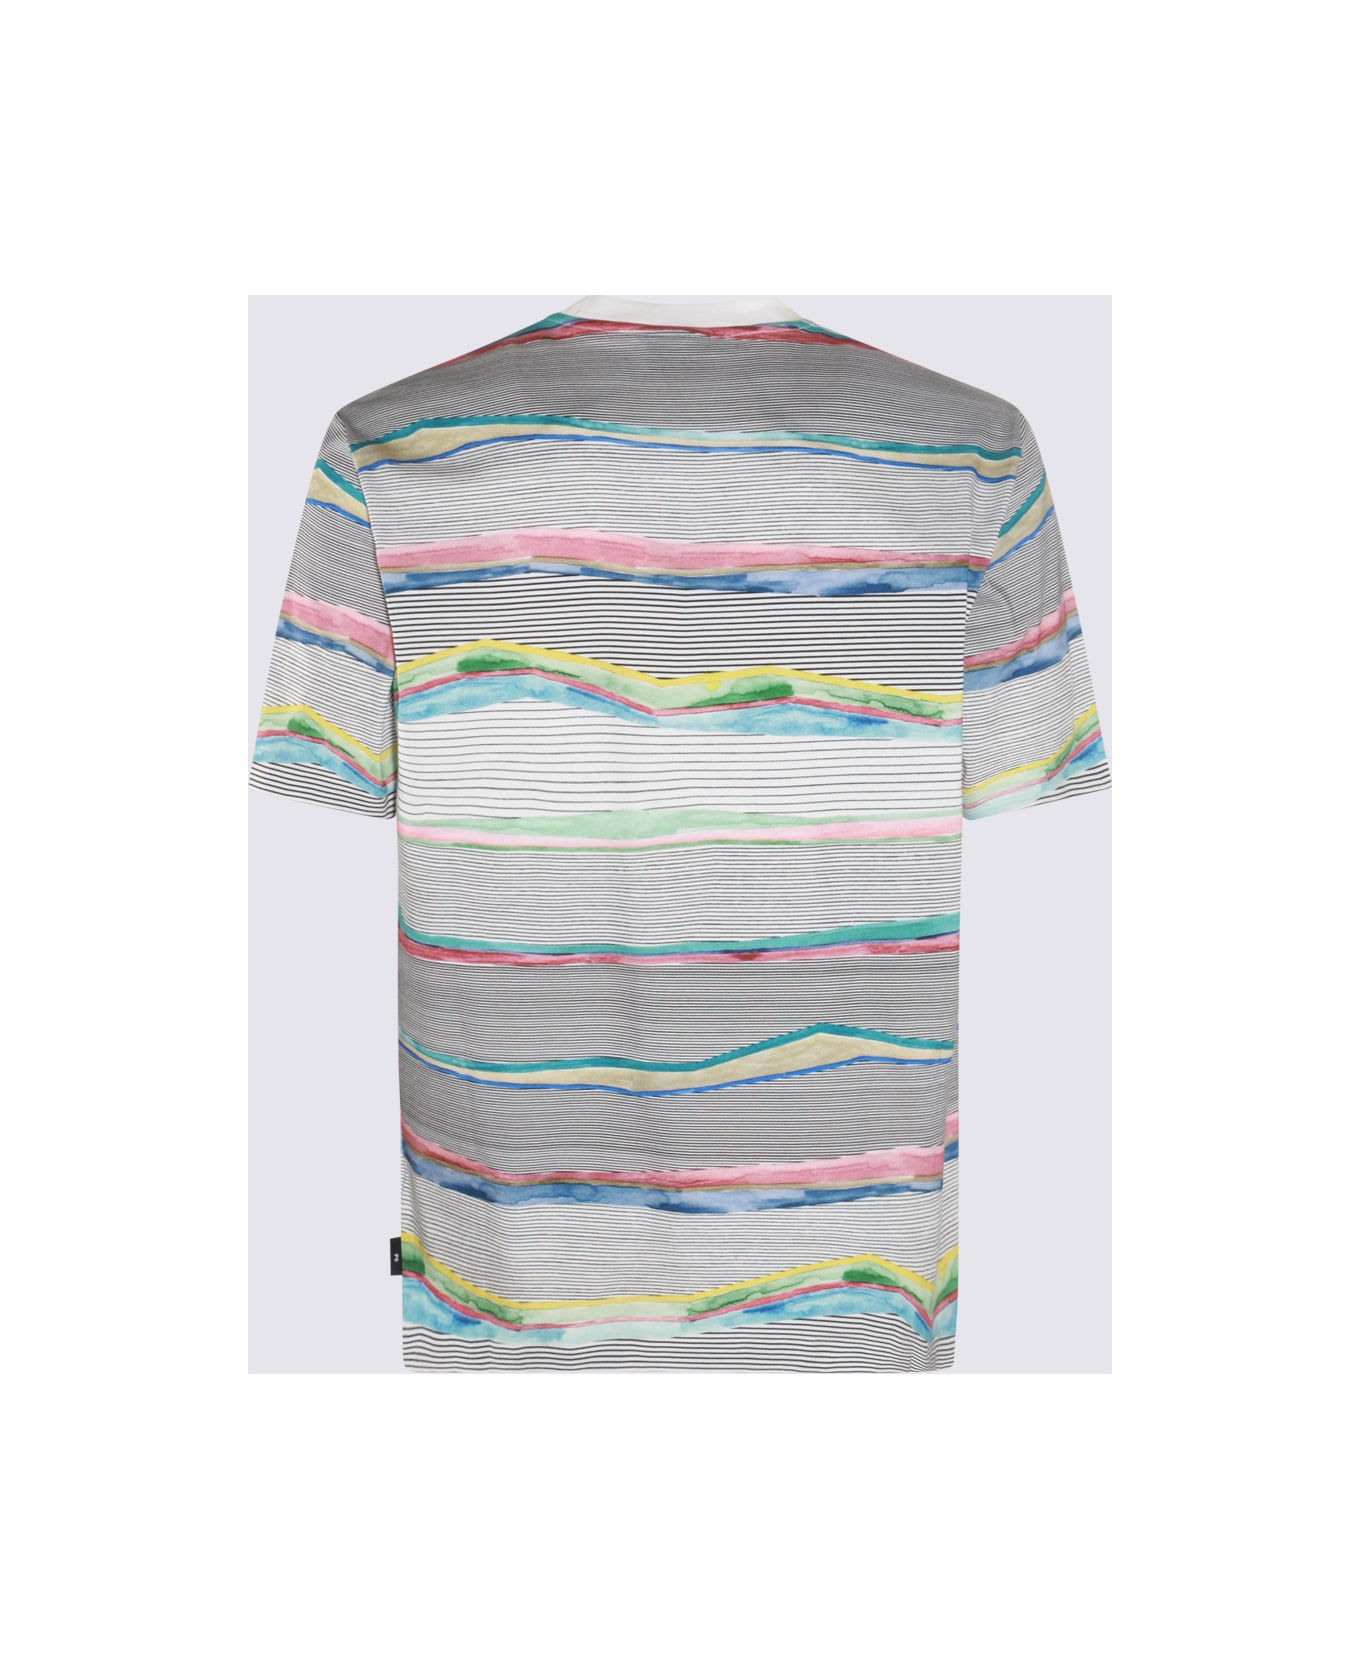 Paul Smith Grey Multicolour Cotton T-shirt - Red